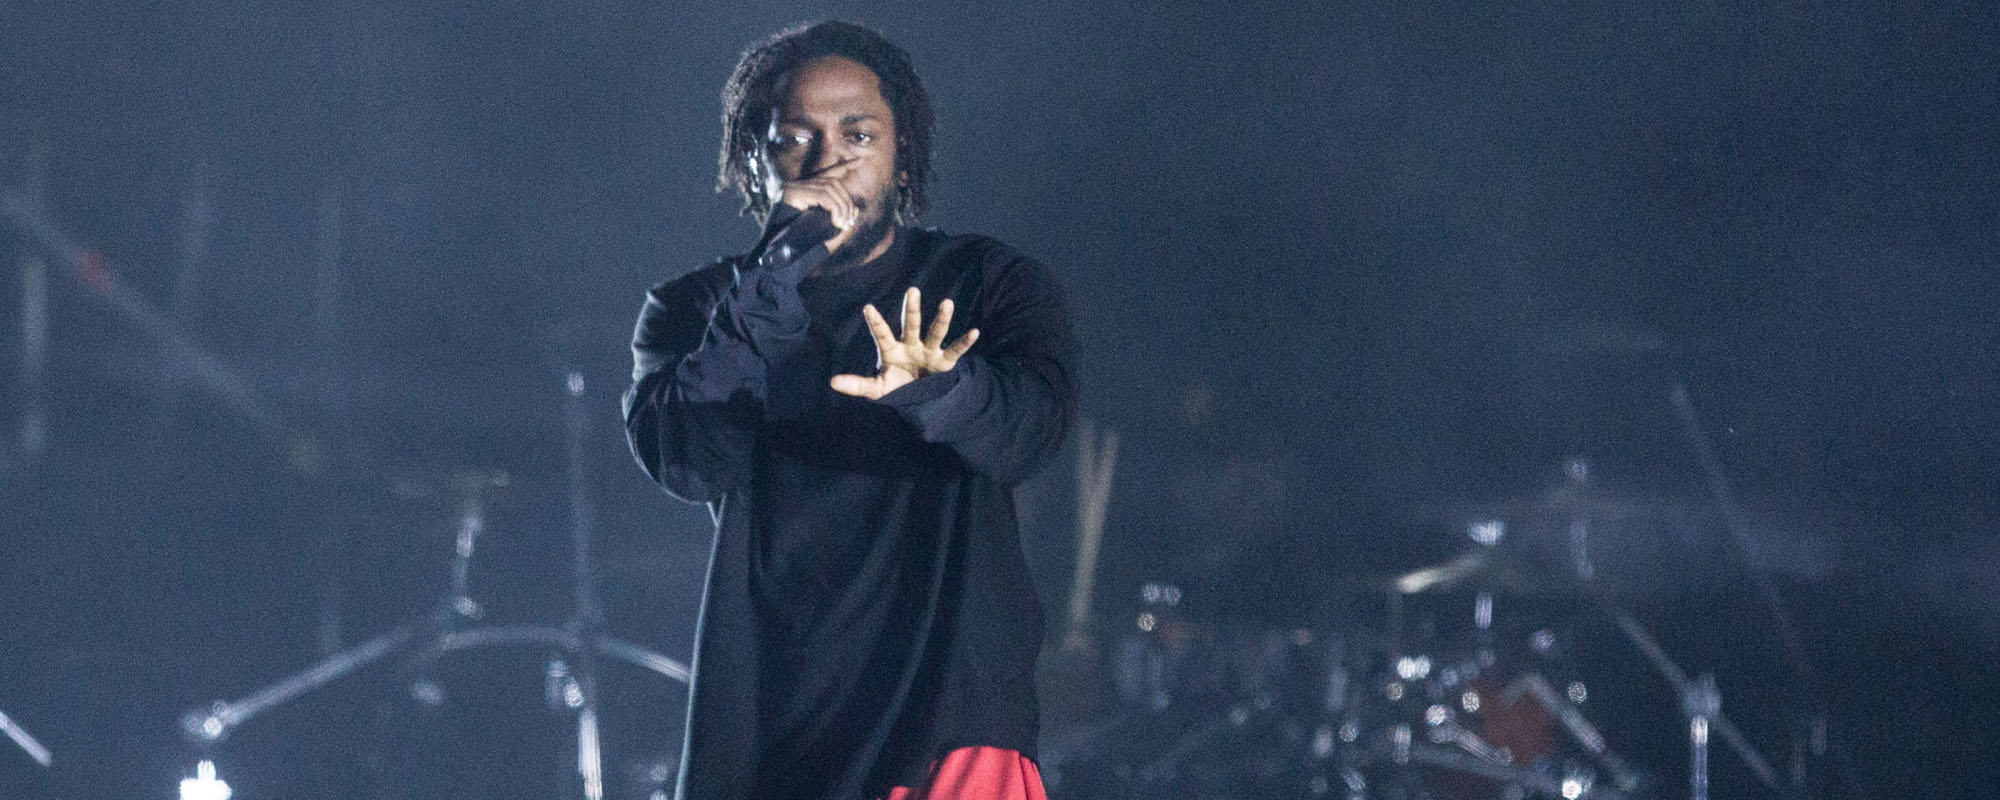 Remember When: Kendrick Lamar and J. Cole Swapped Beats for “Black Friday” Songs